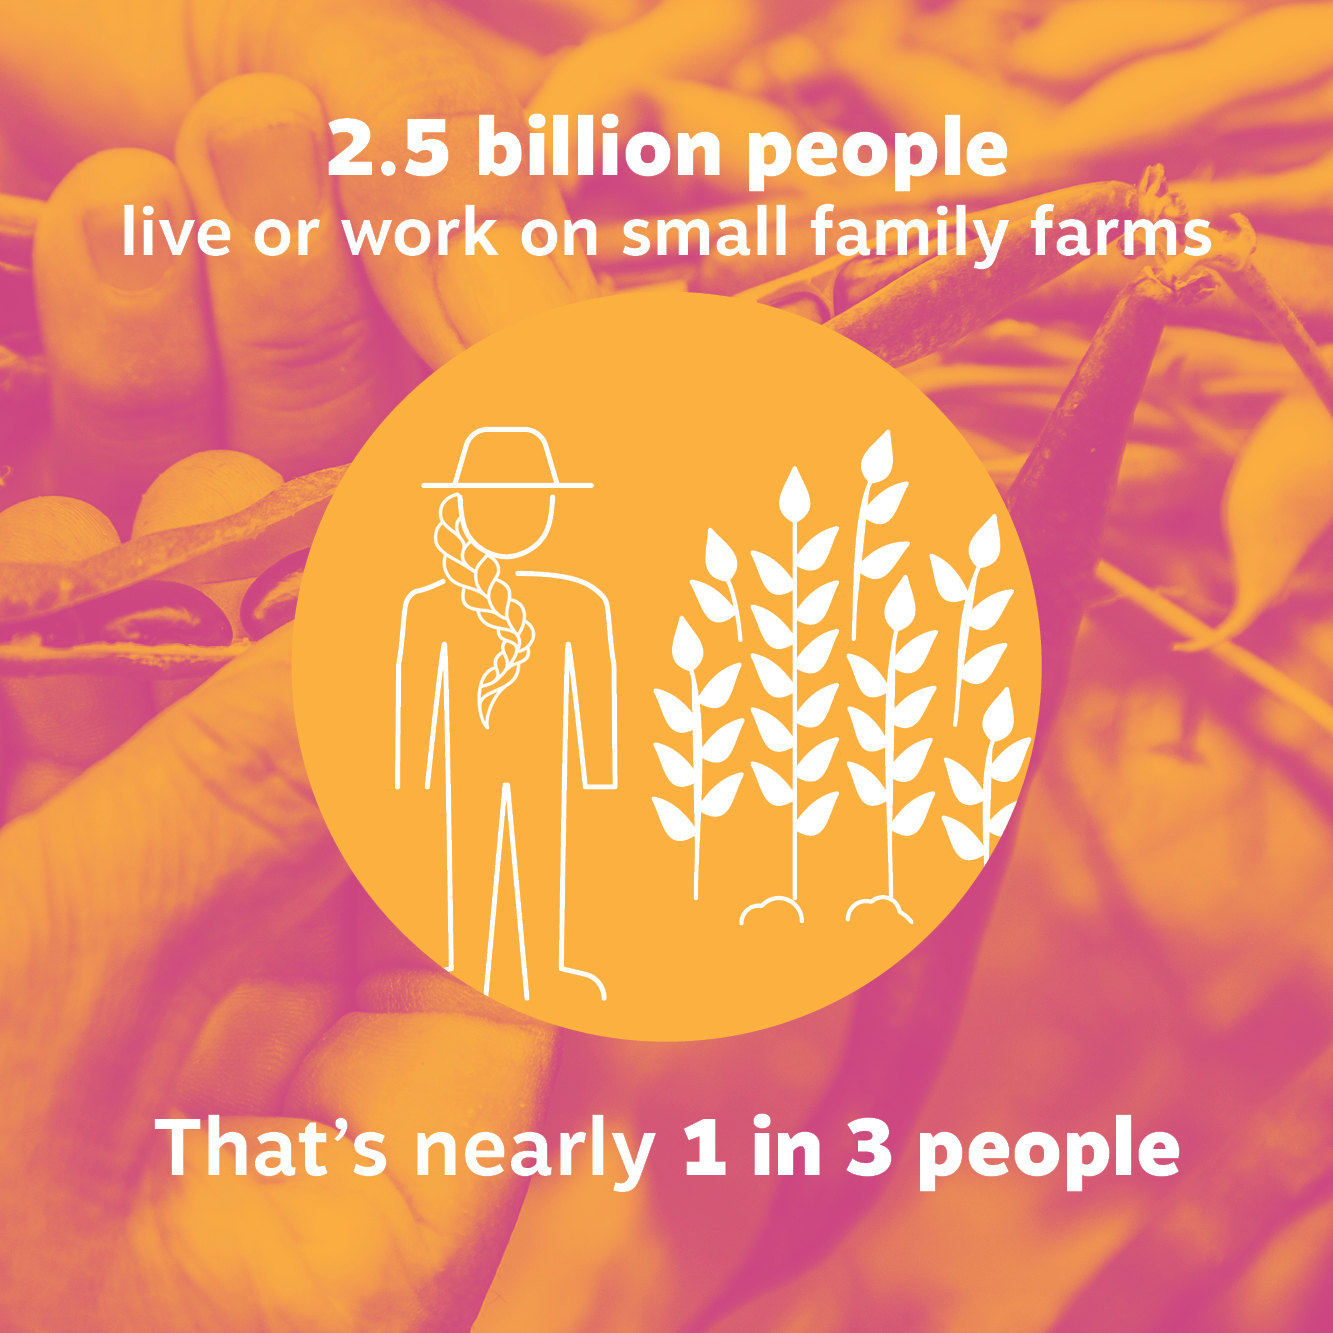 World Food Day - Who really feeds the world?  2.5 billion people live or work on small family farms  That’s nearly 1 in 3 people